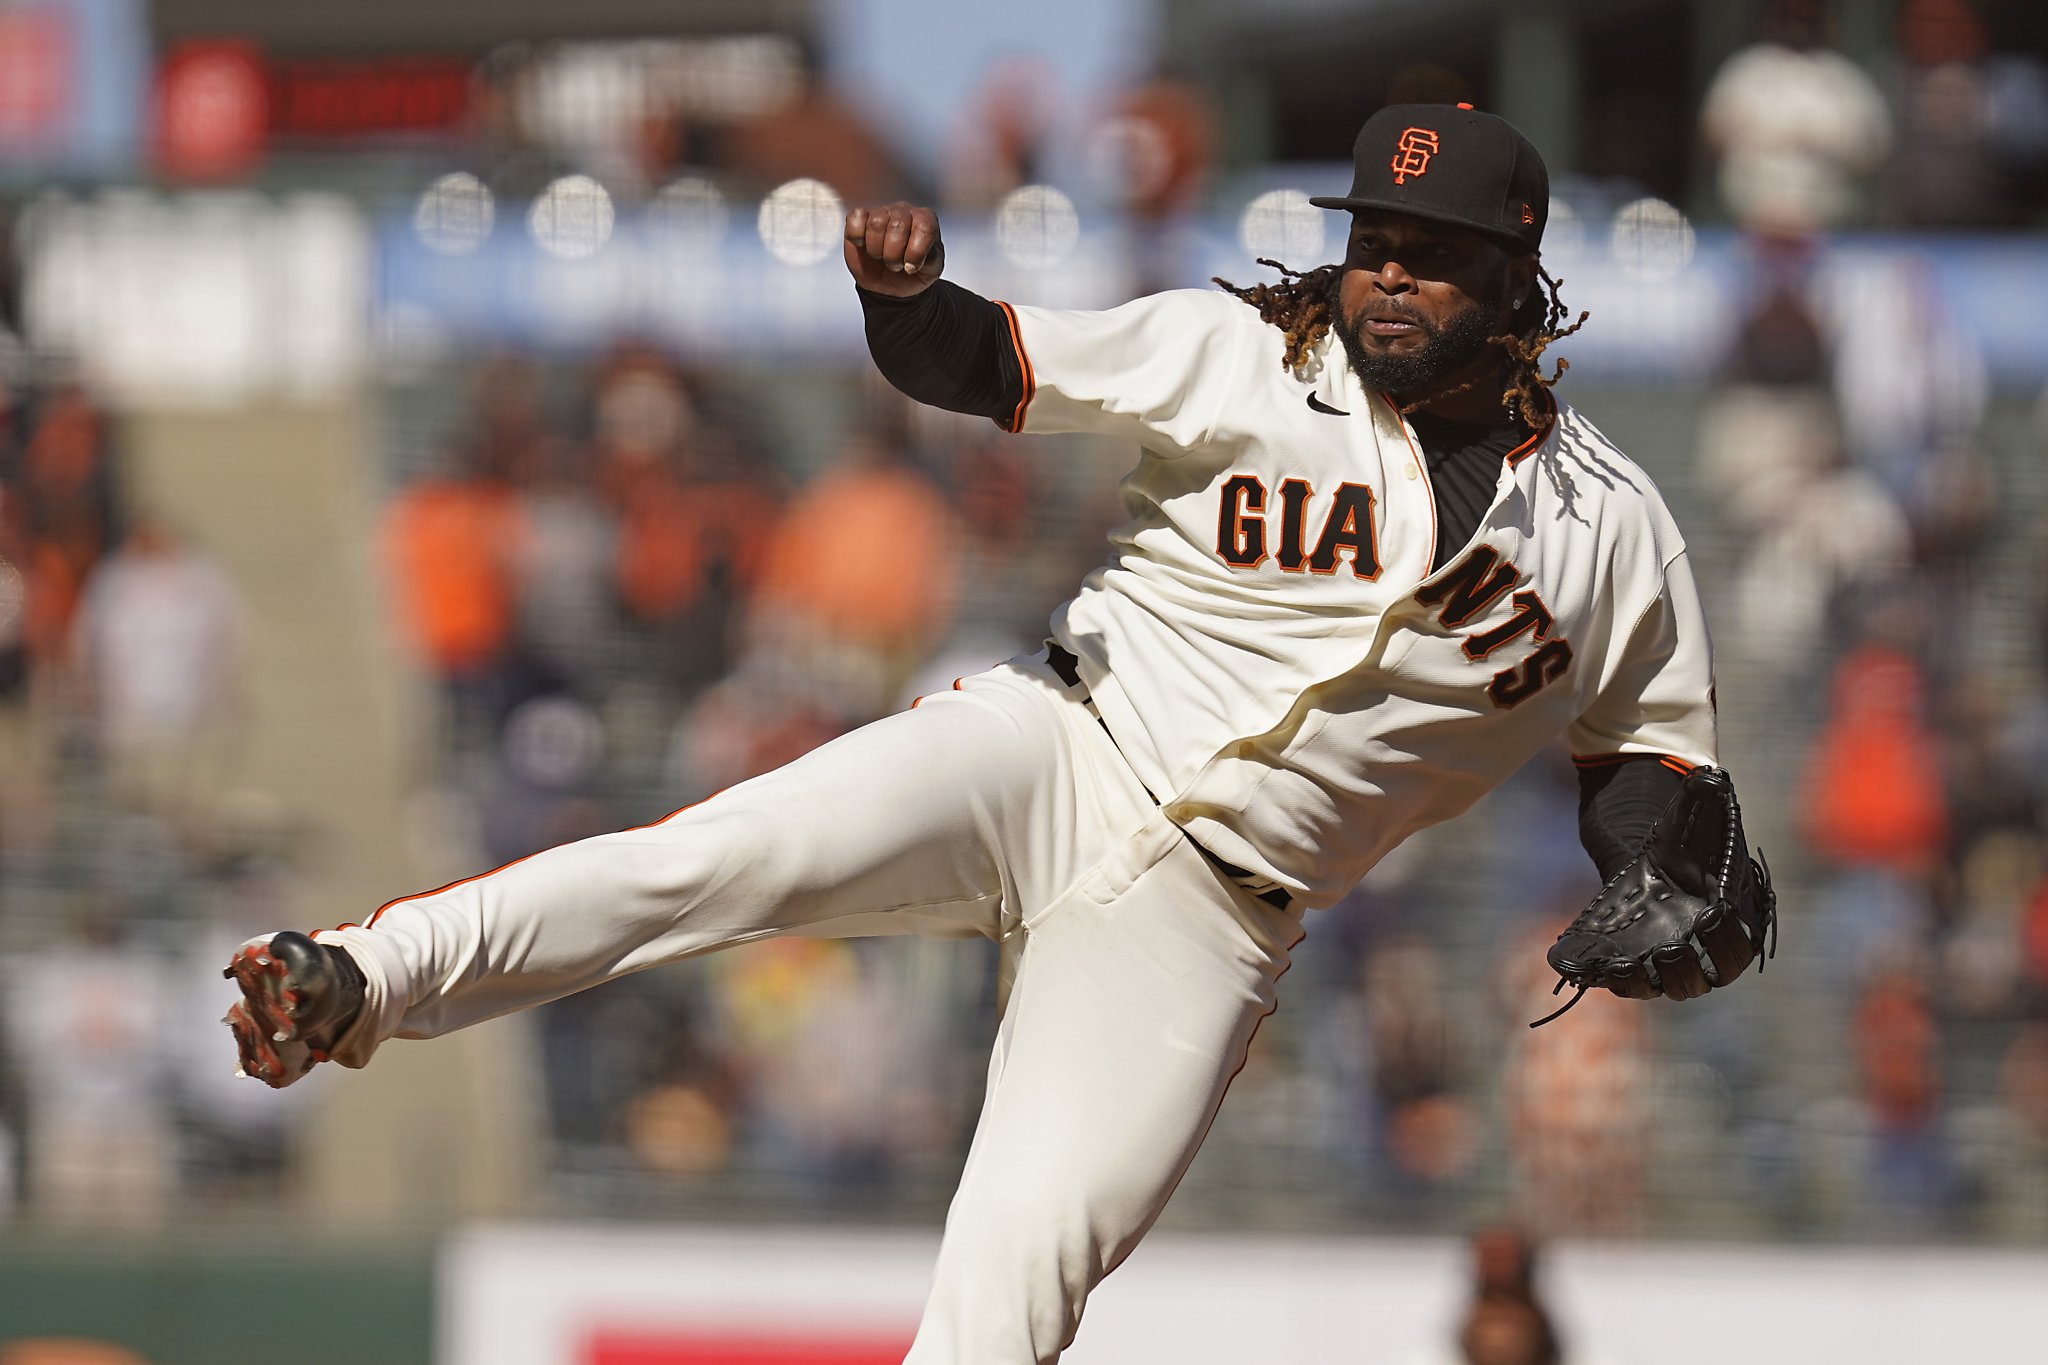 Johnny Cueto strikes out Solak, 03/16/2021